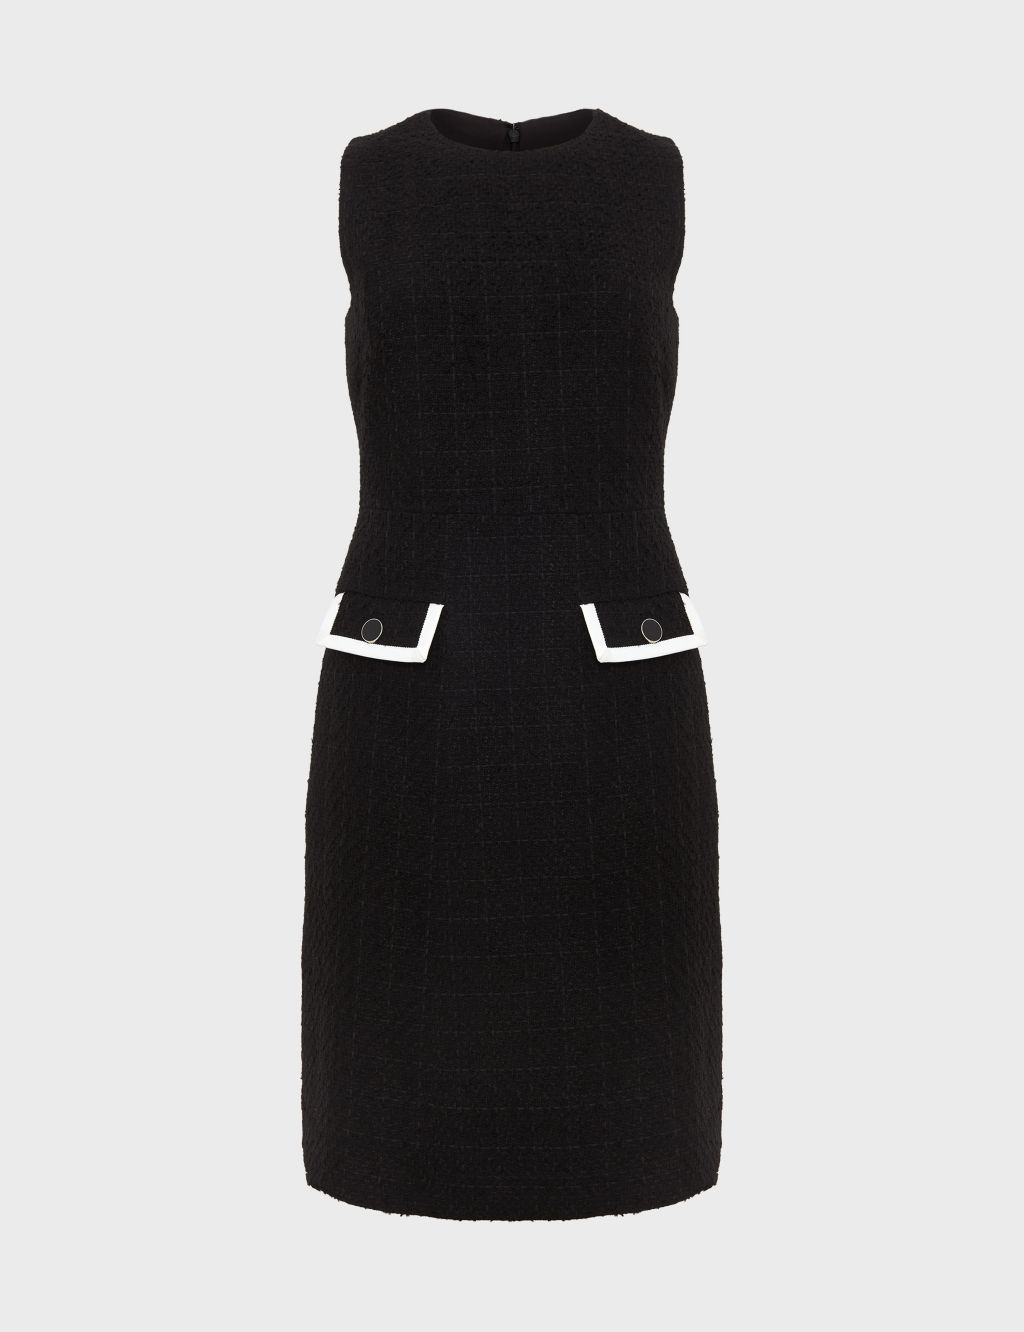 Tweed Knee Length Dress, M&S Collection